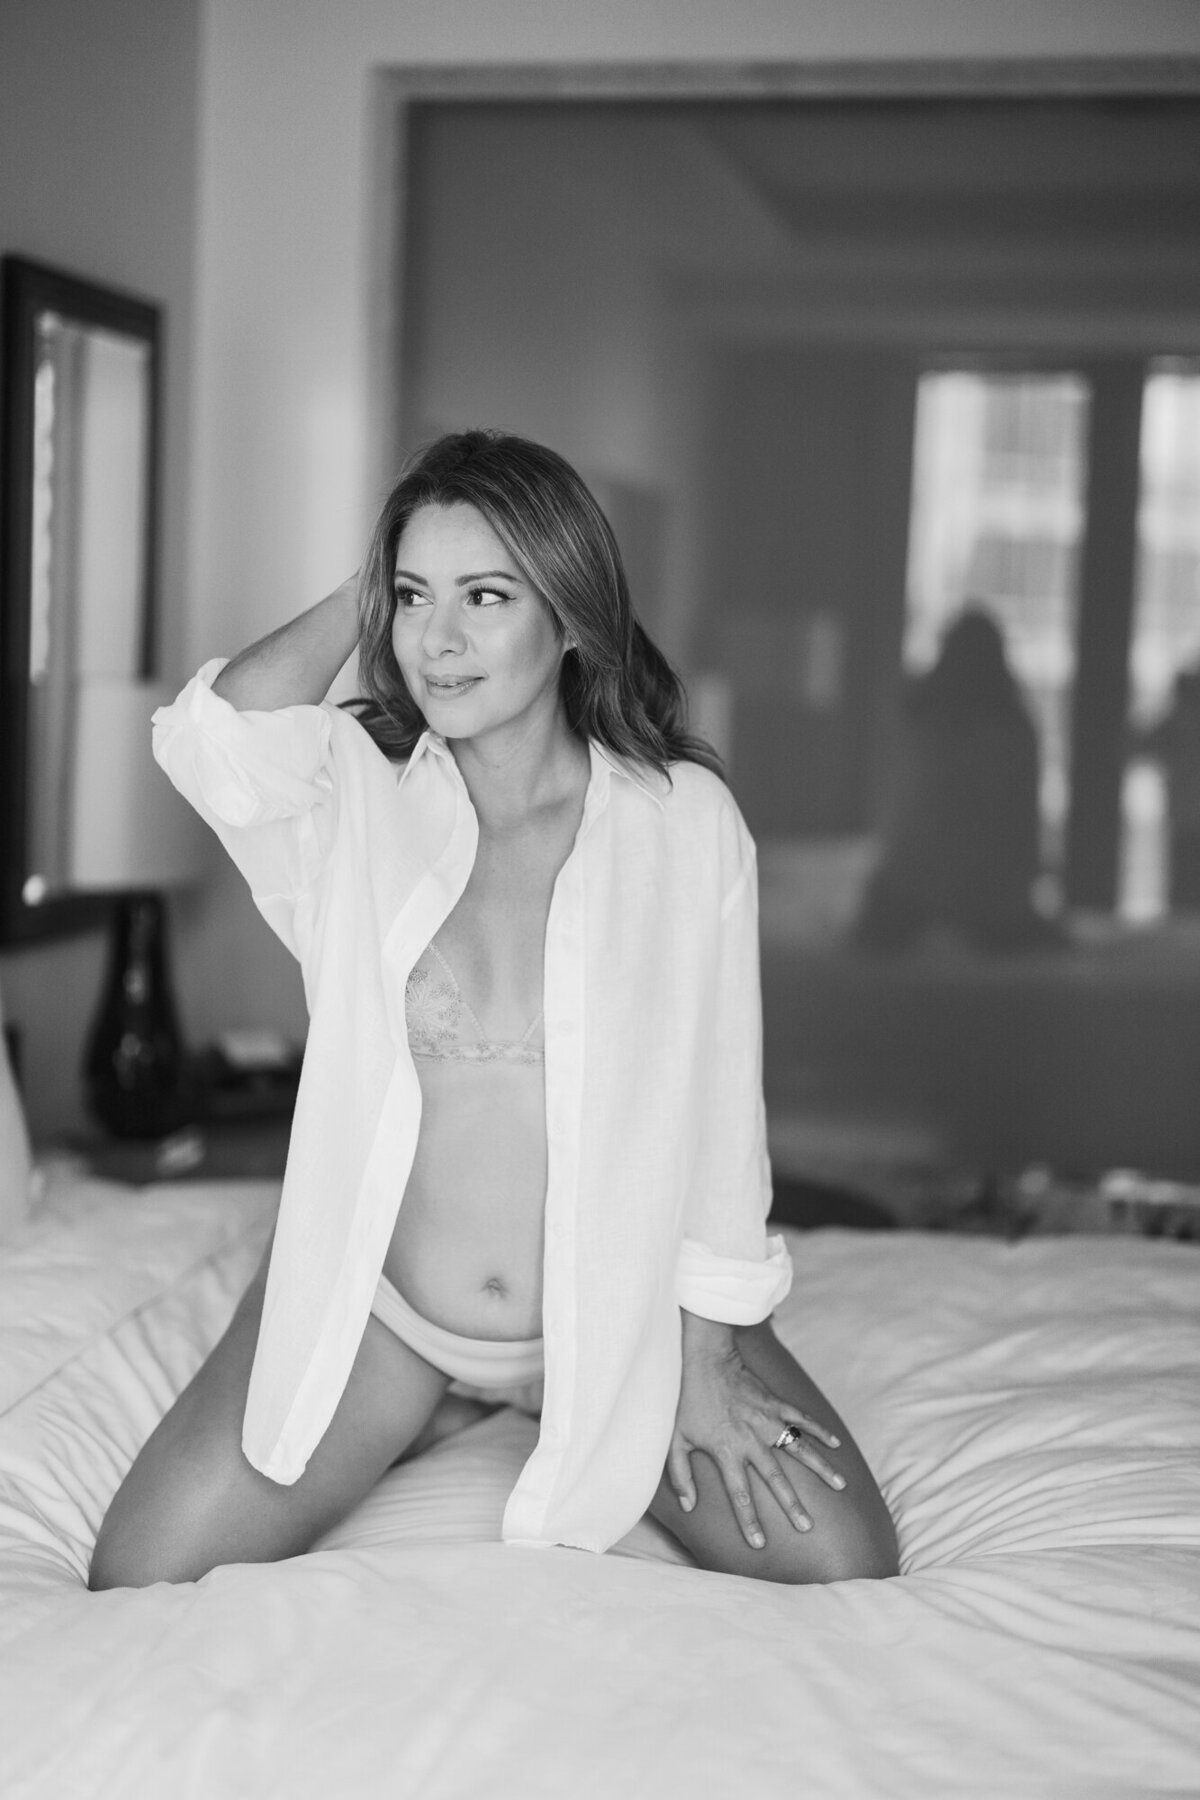 A sultry boudoir photo taken at the Langham in downtown Chicago